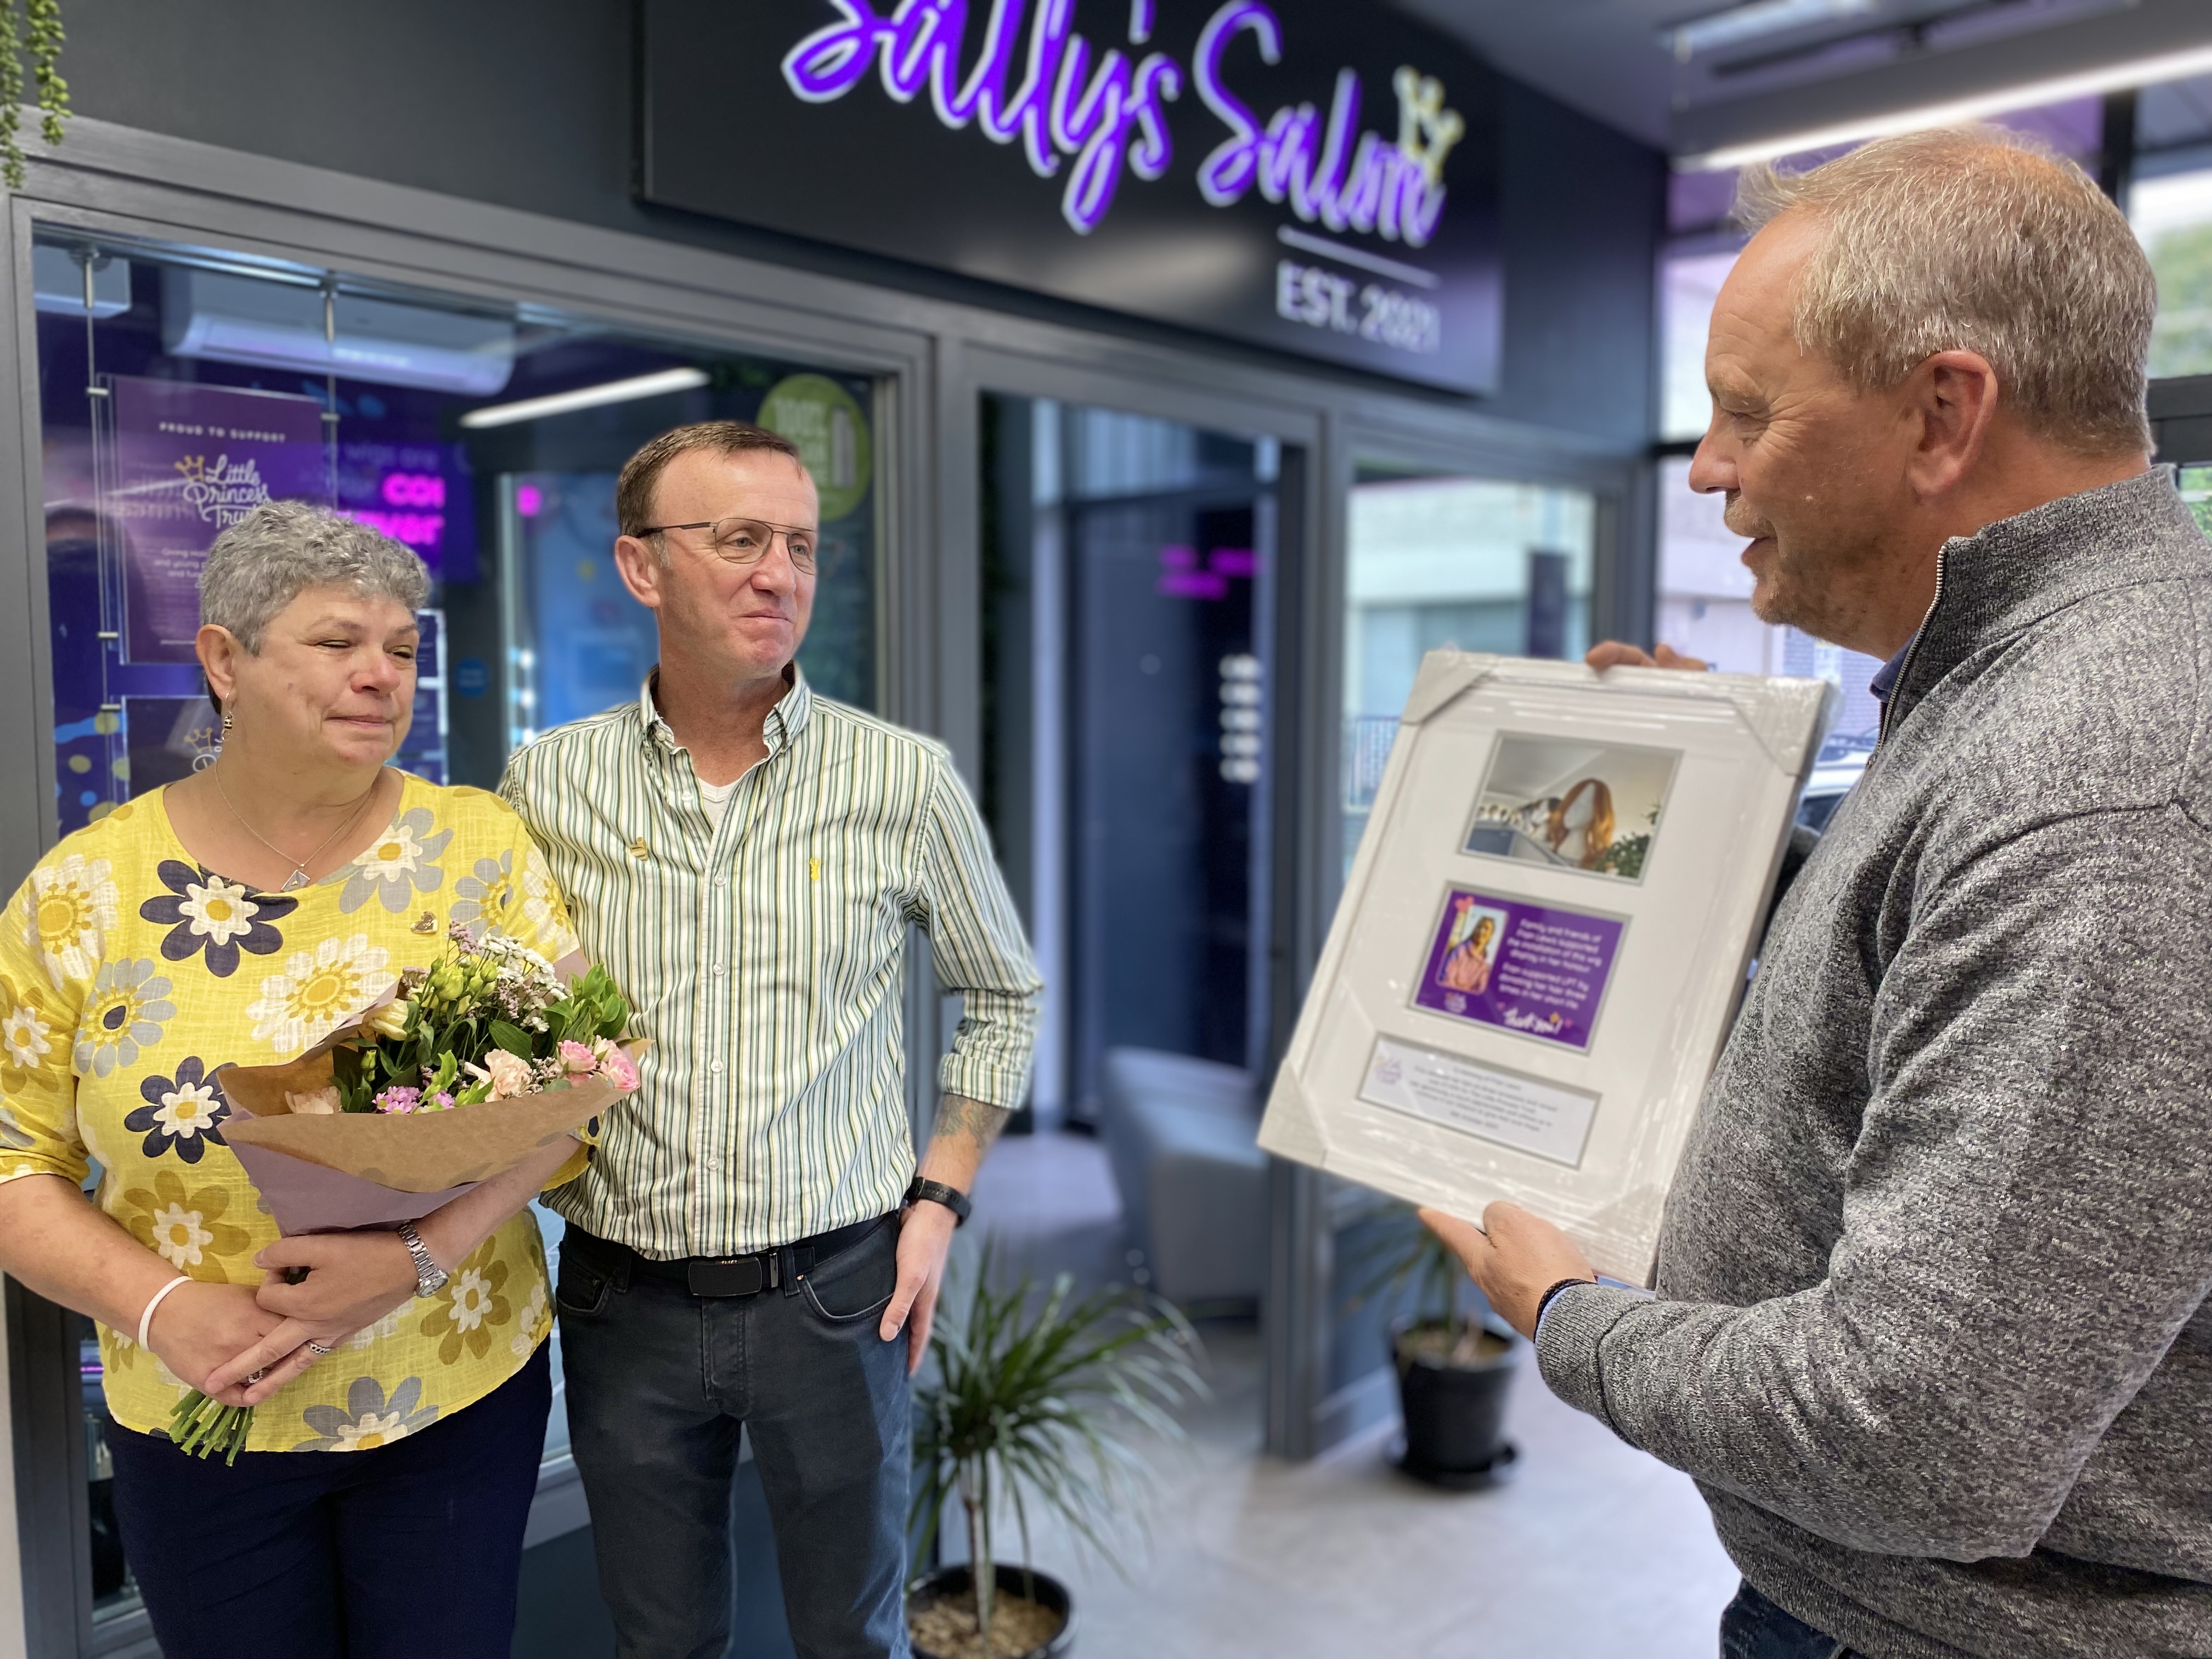 Phil Brace, from The Little Princess Trust, presents Fran's parents with a gift in recognition of their daughter's incredible support for our charity.